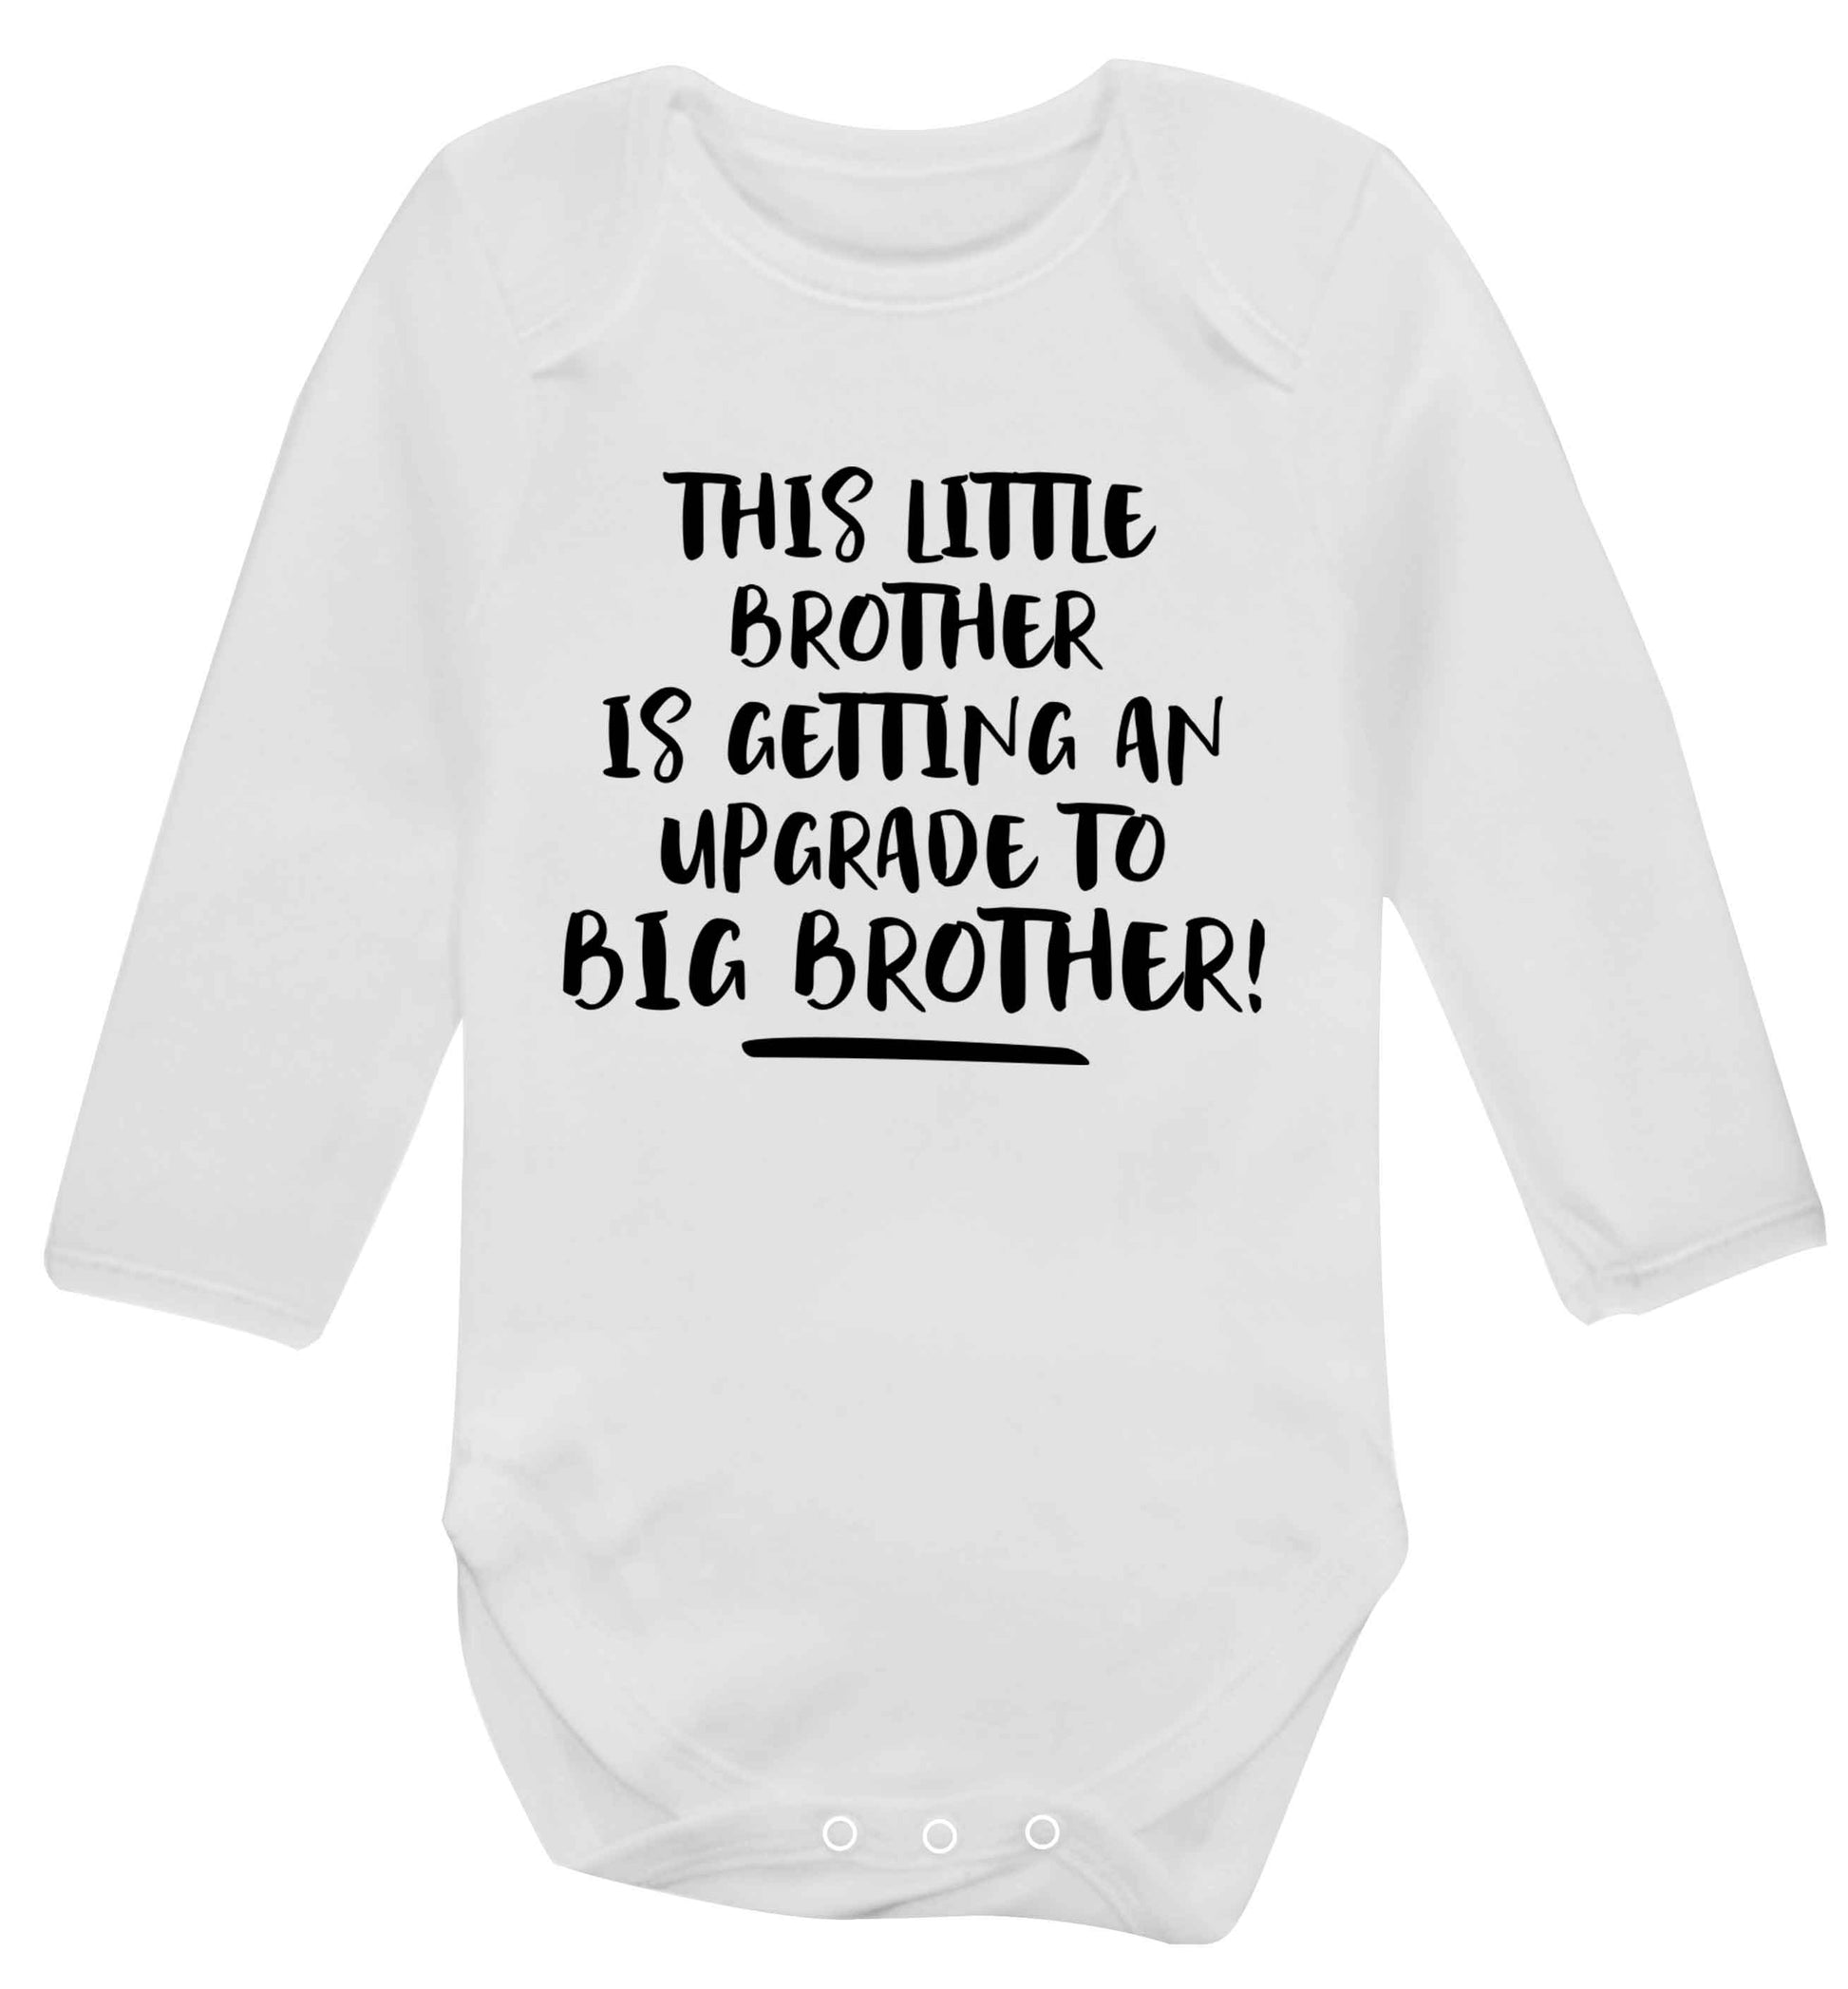 This little brother is getting an upgrade to big brother! Baby Vest long sleeved white 6-12 months